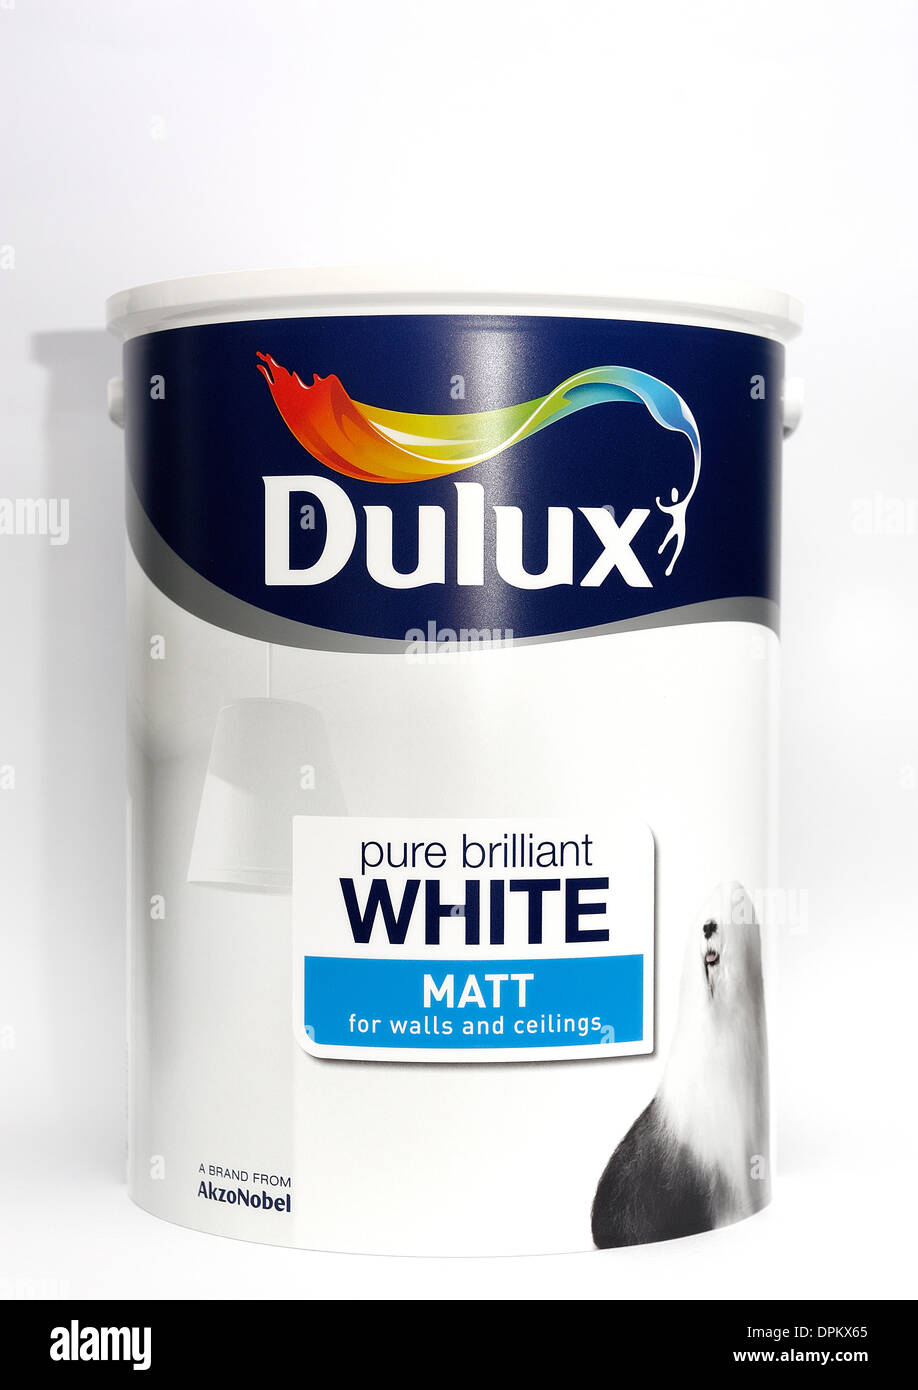 A Tin Of Dulux Brilliant White Matt Paint For Walls And